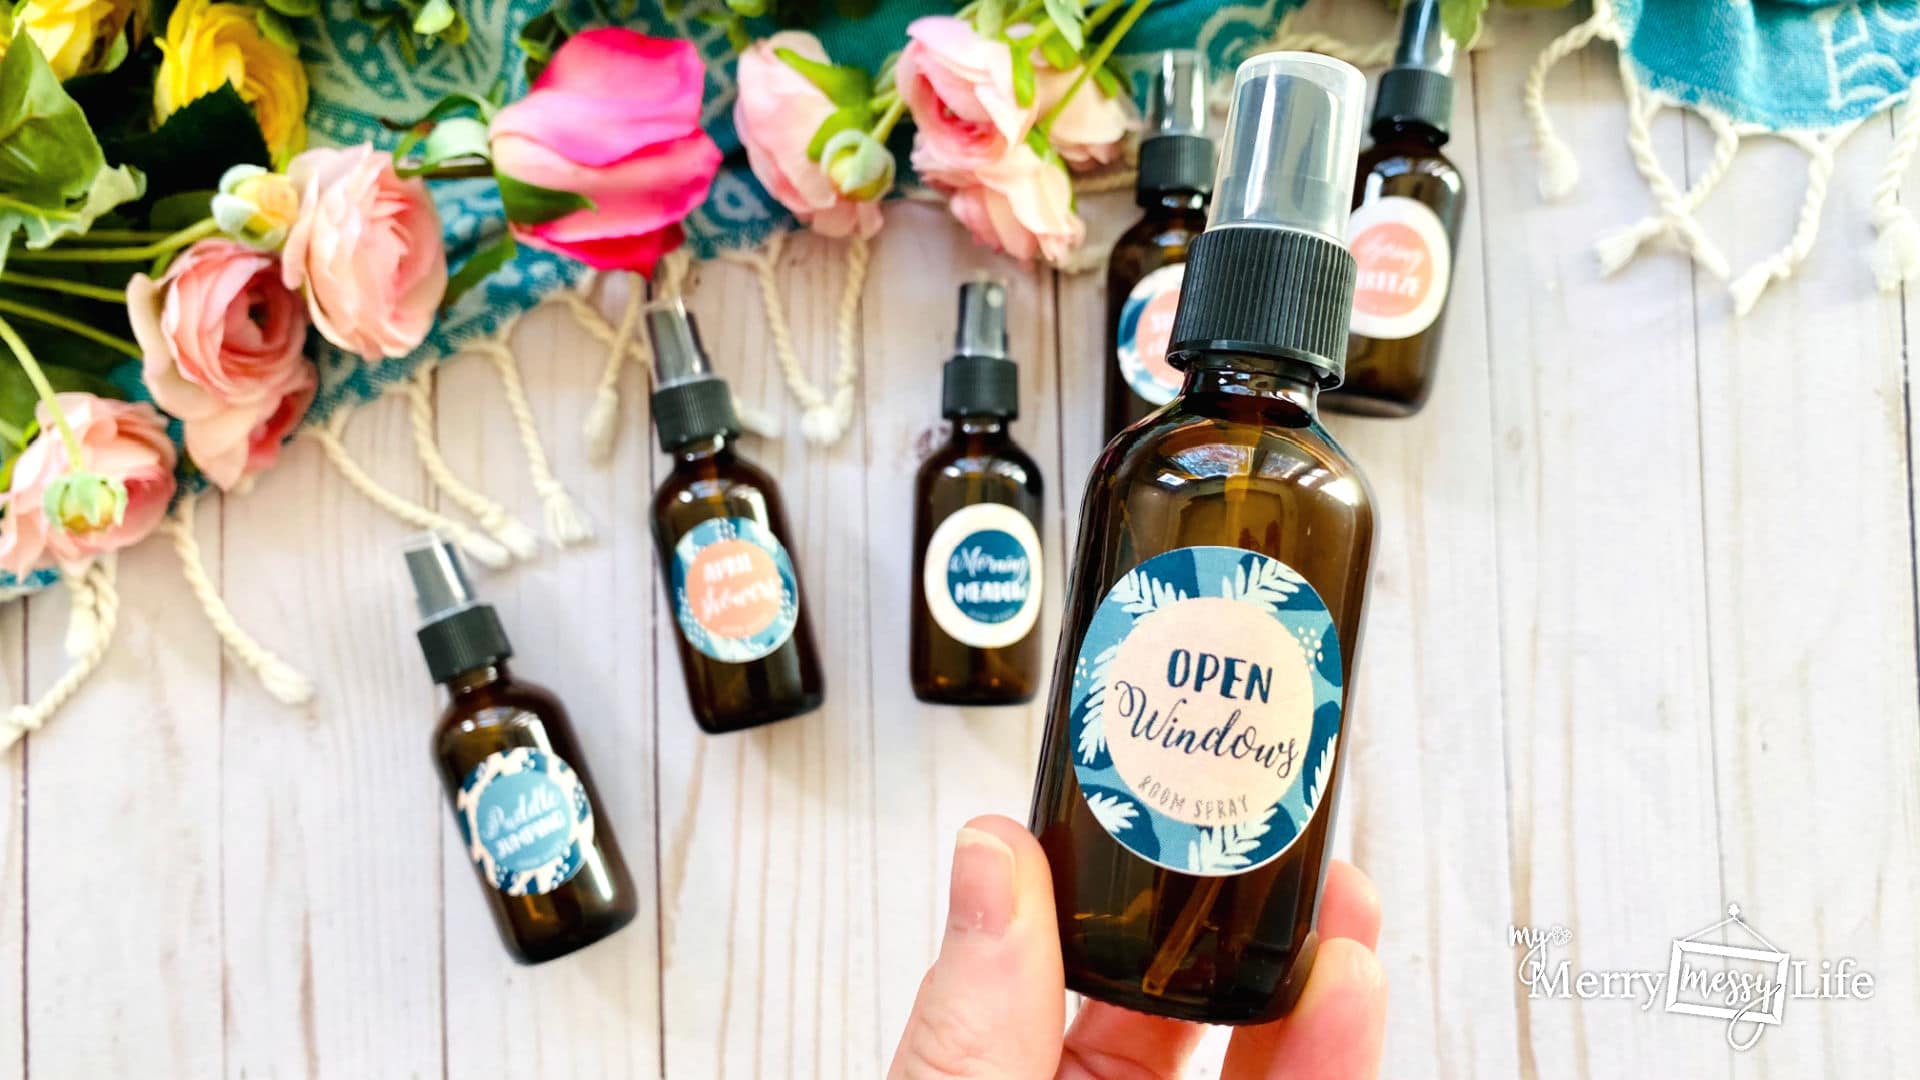 Open Windows Spring Room Spray Recipe and printable label using pure essential oils